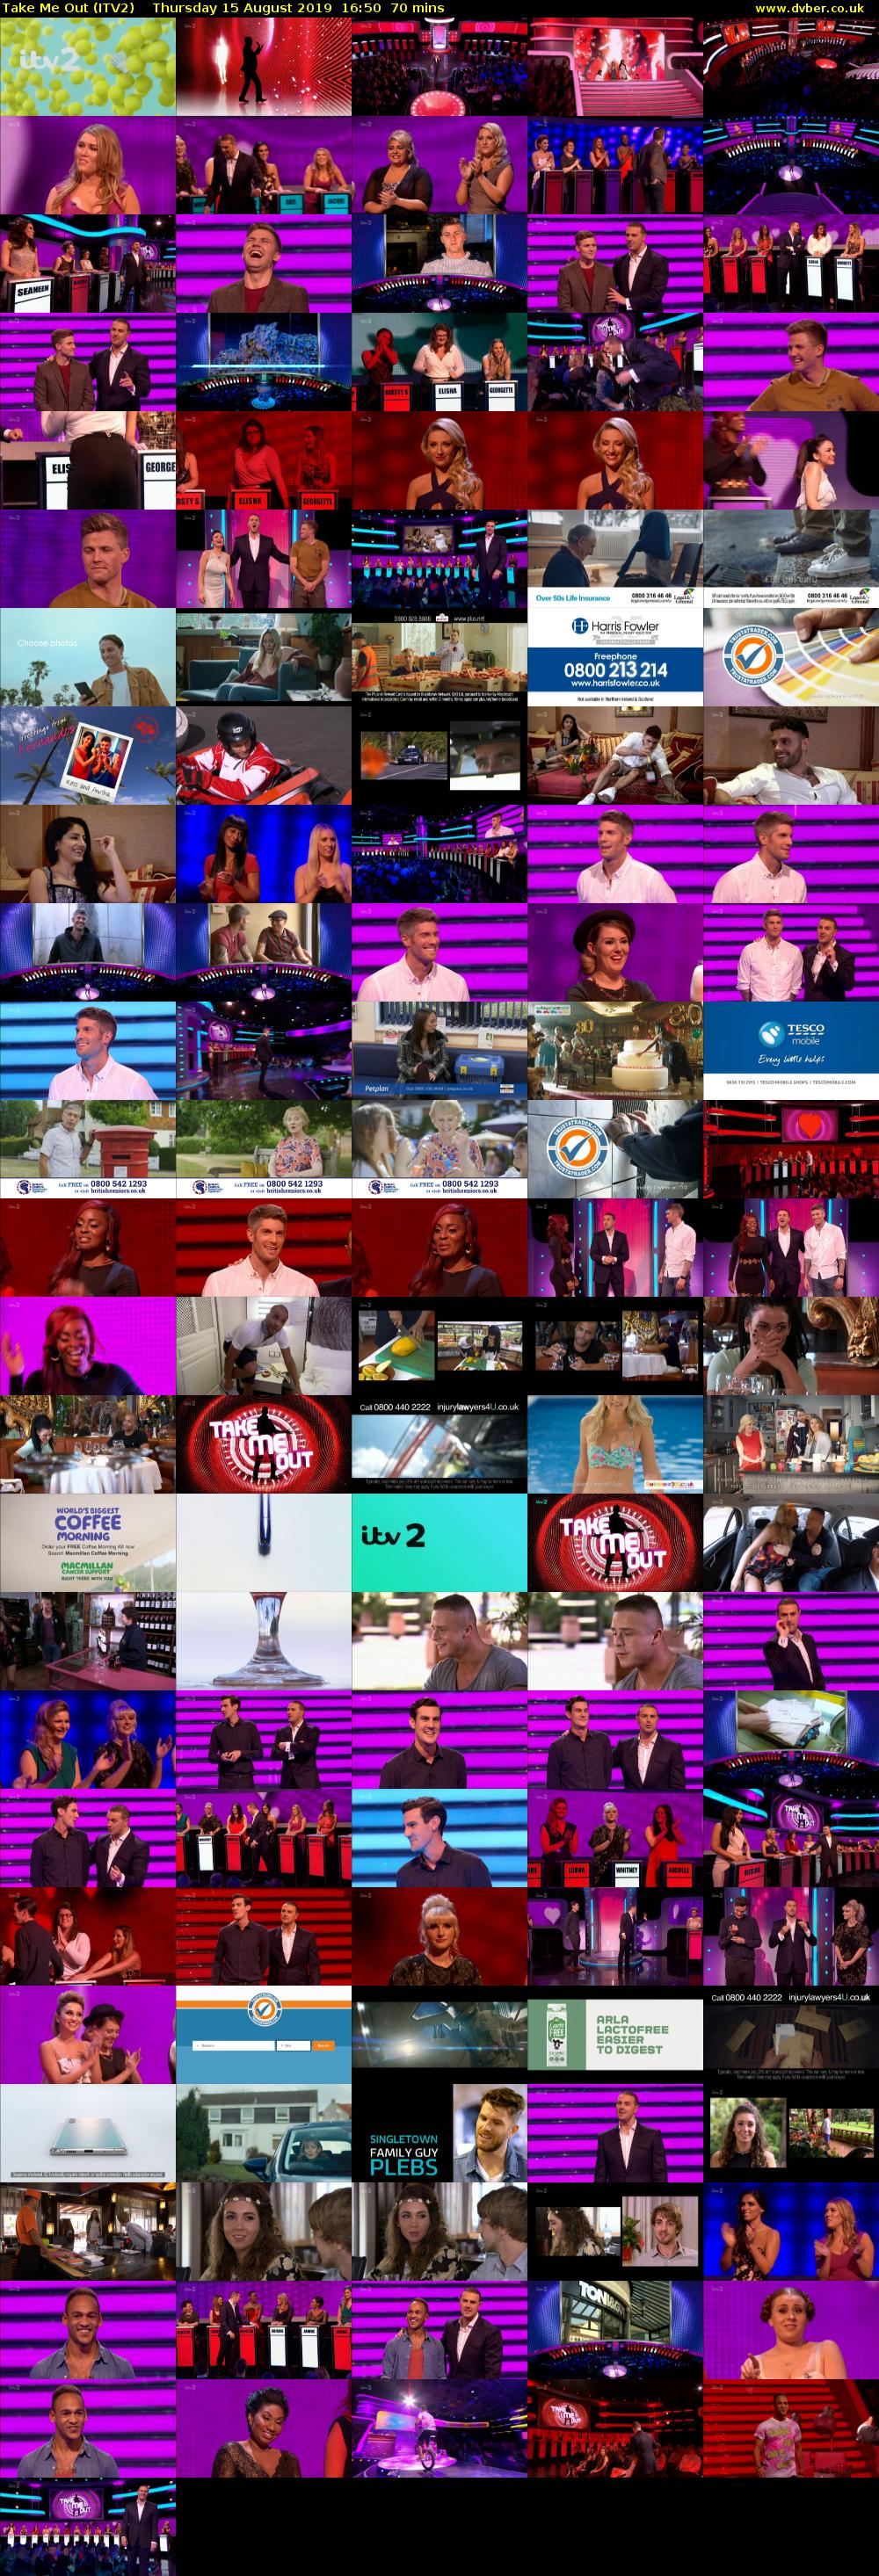 Take Me Out (ITV2) Thursday 15 August 2019 16:50 - 18:00